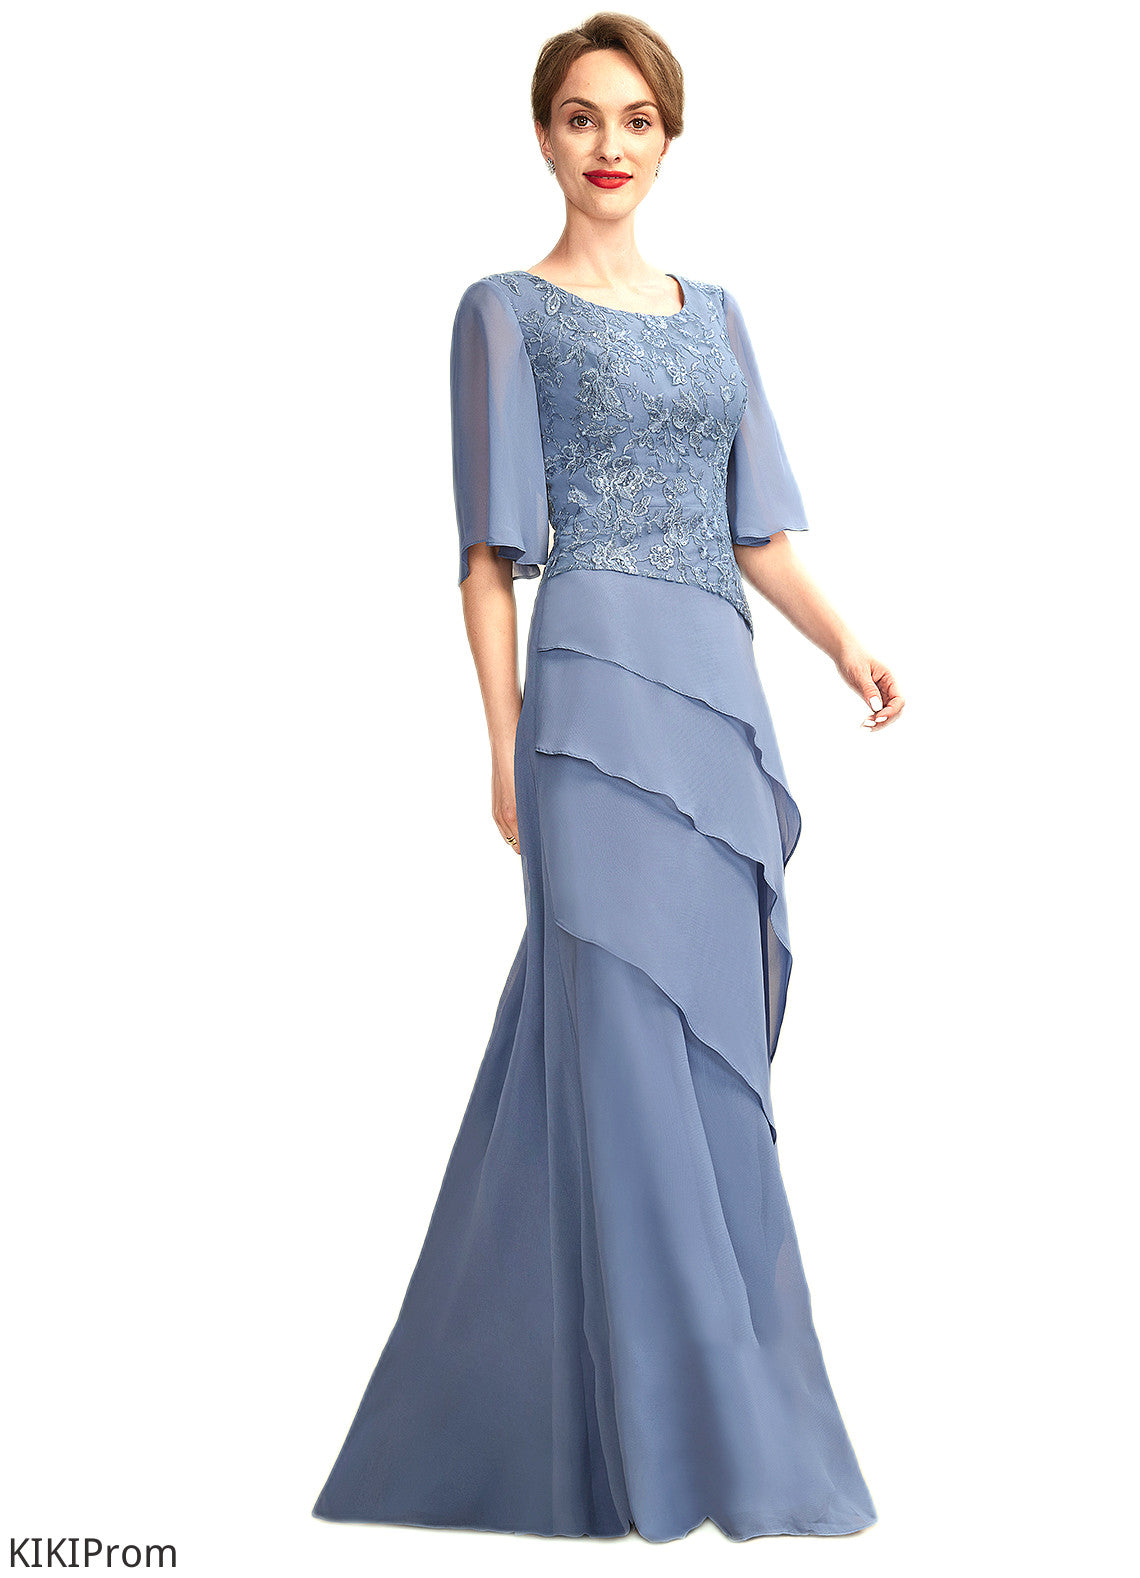 Logan A-Line Scoop Neck Floor-Length Chiffon Lace Mother of the Bride Dress With Sequins Cascading Ruffles DZ126P0014997